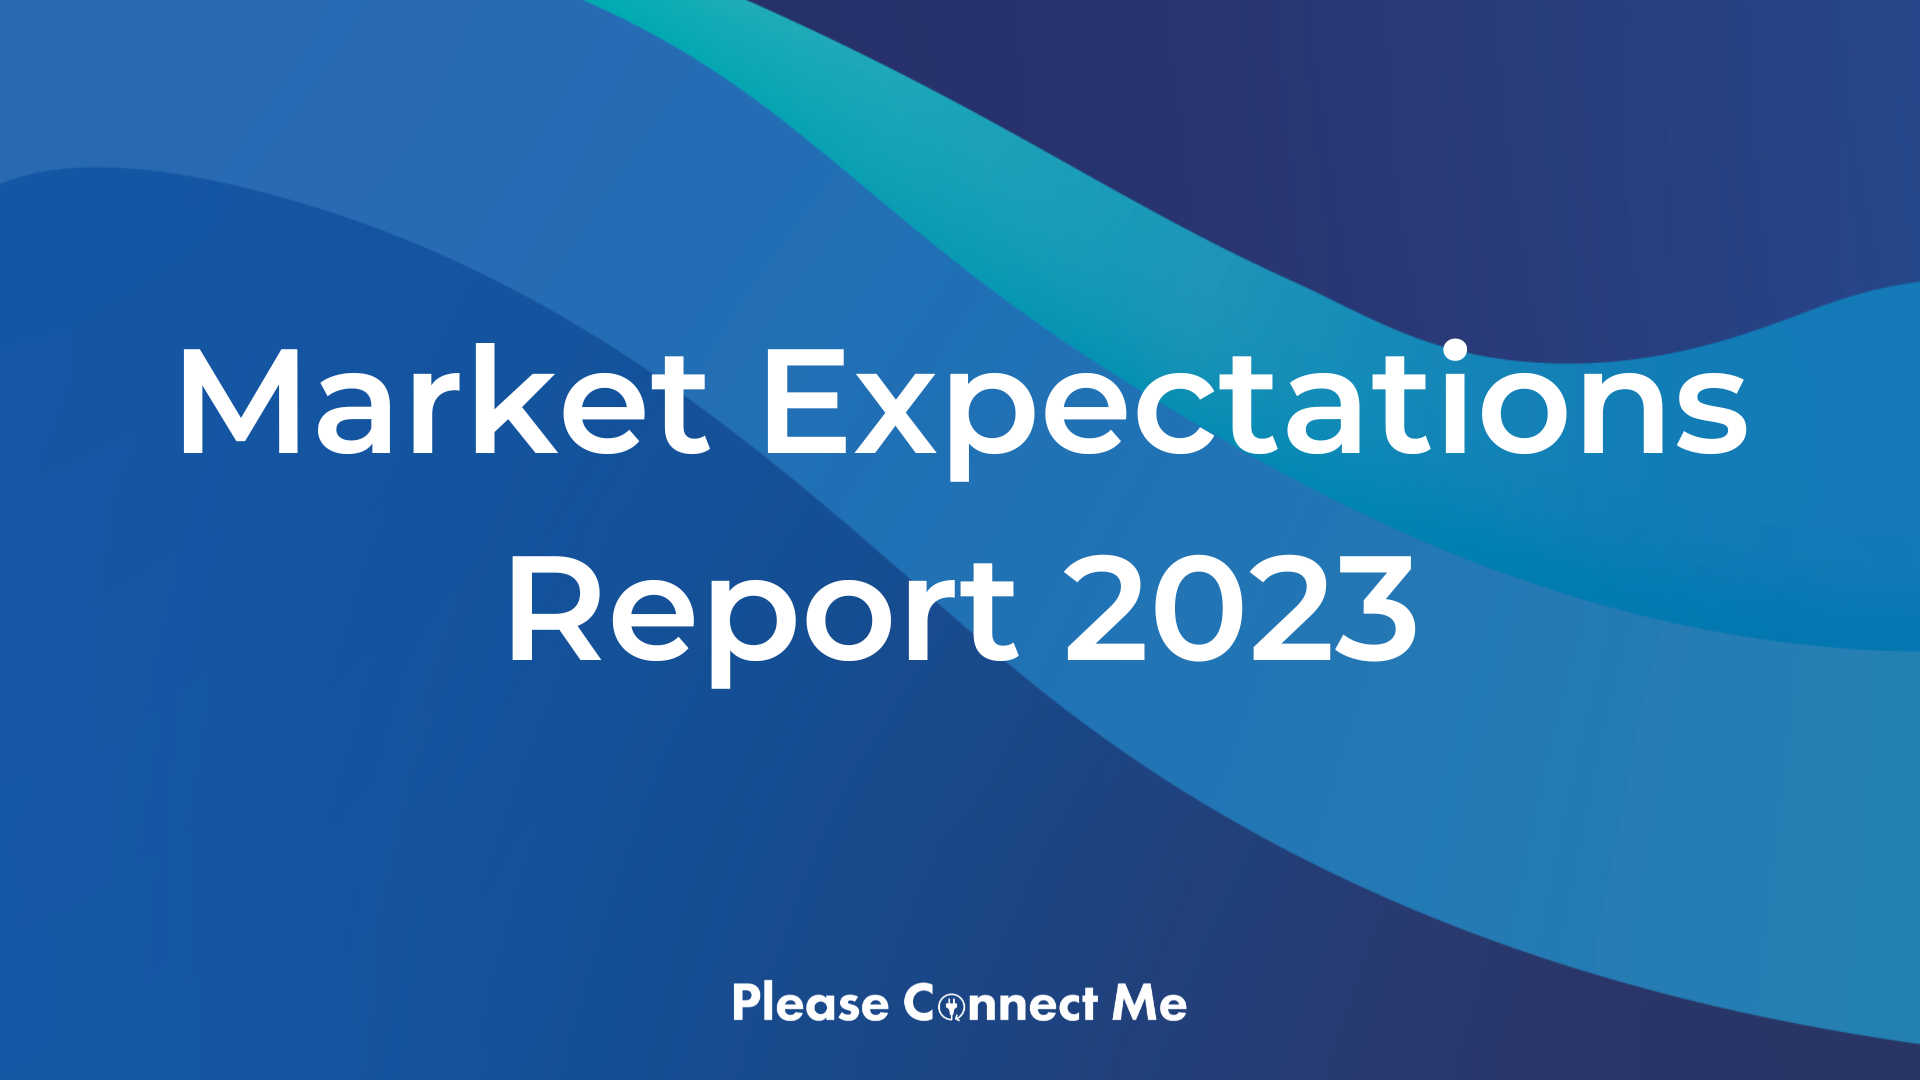 Download our market expectations report today.